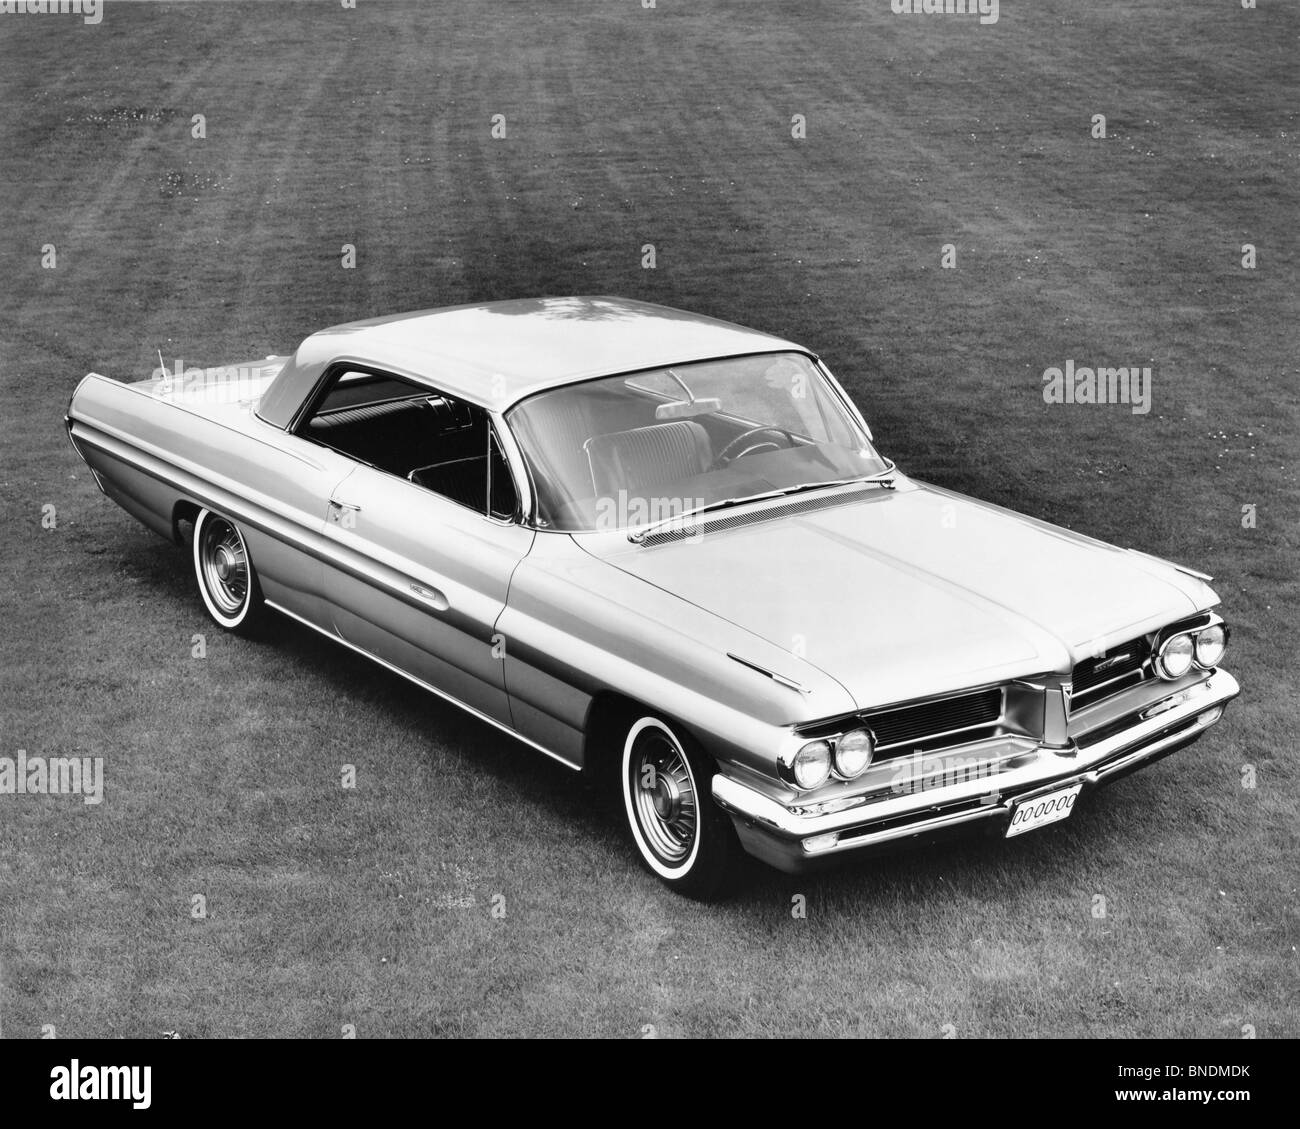 High angle view of a car on a landscape, 1962 Pontiac Stock Photo